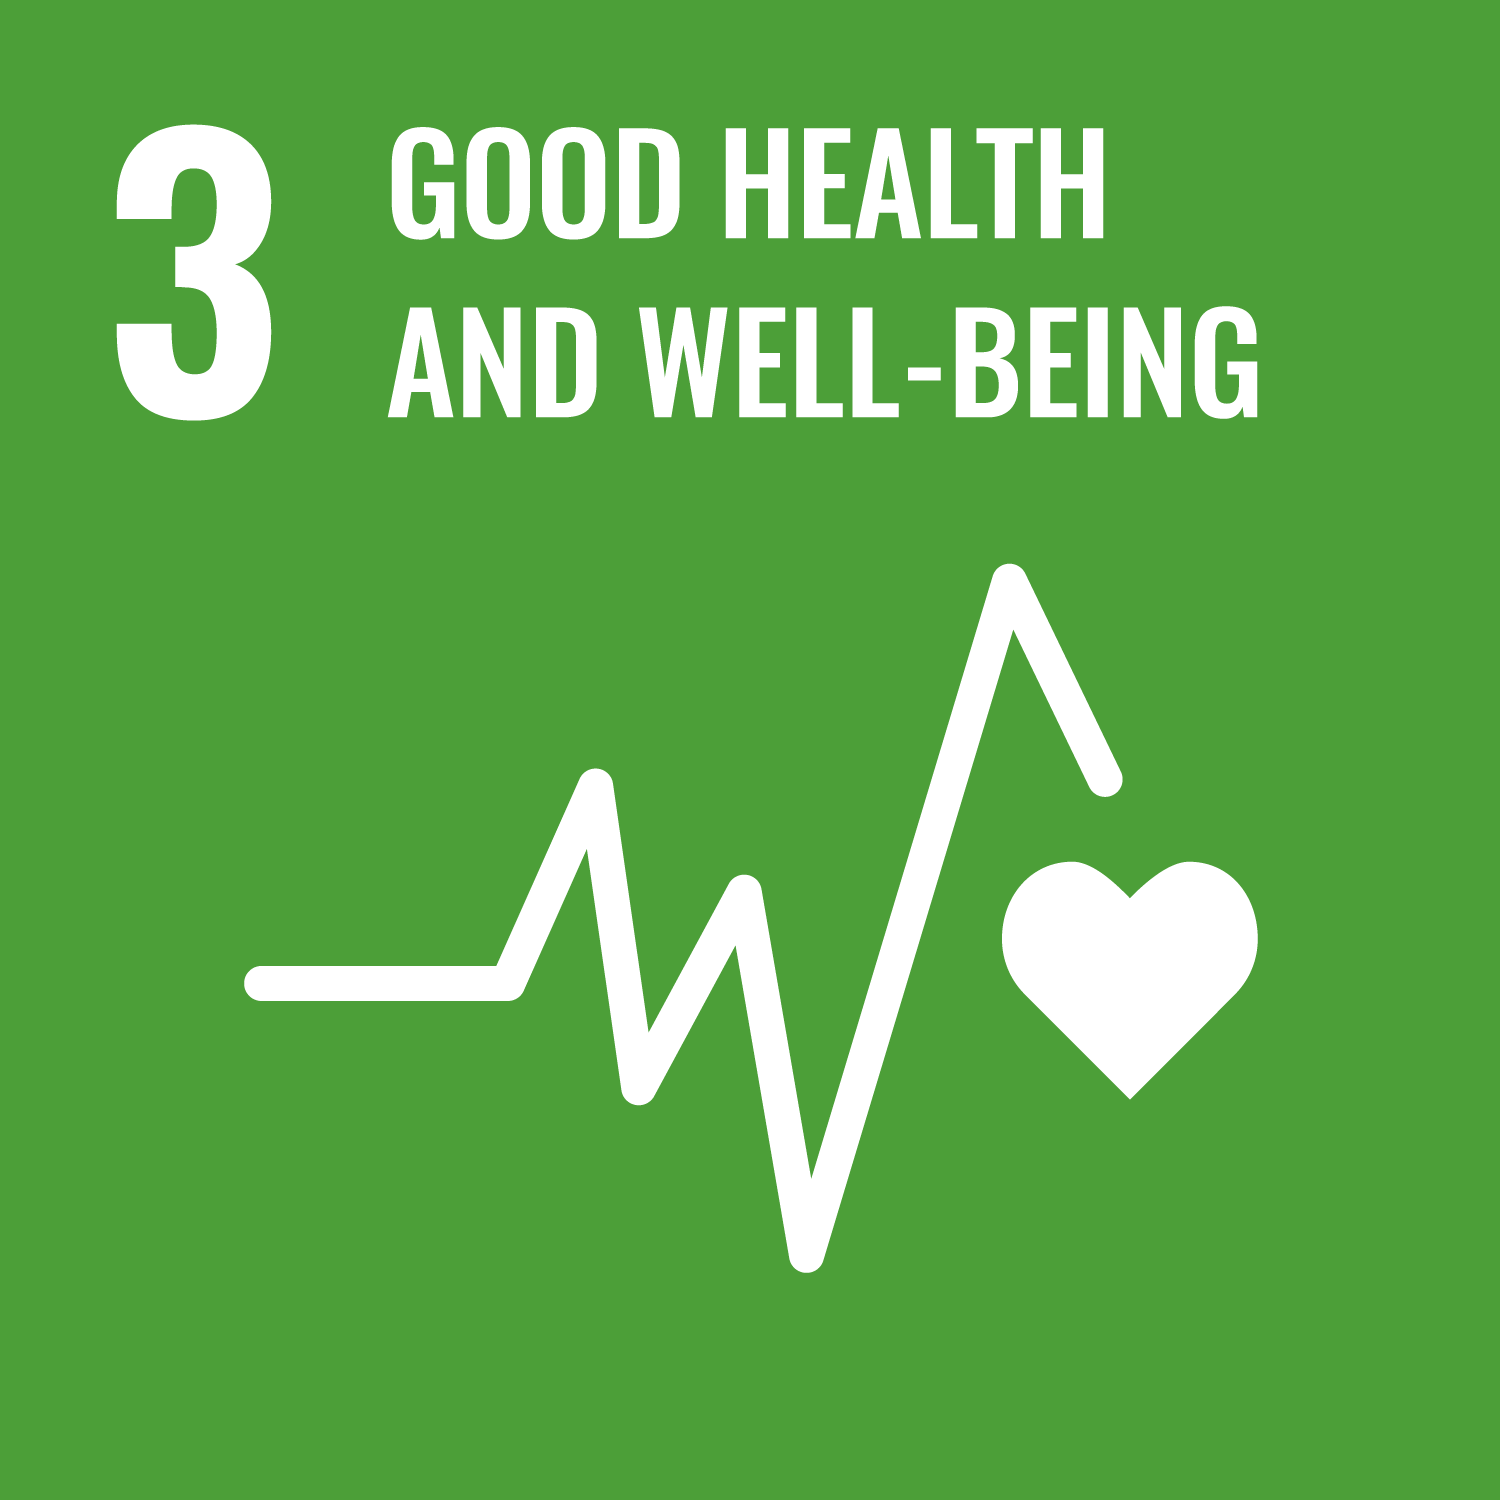 SDG 3. Good health and wellbeing